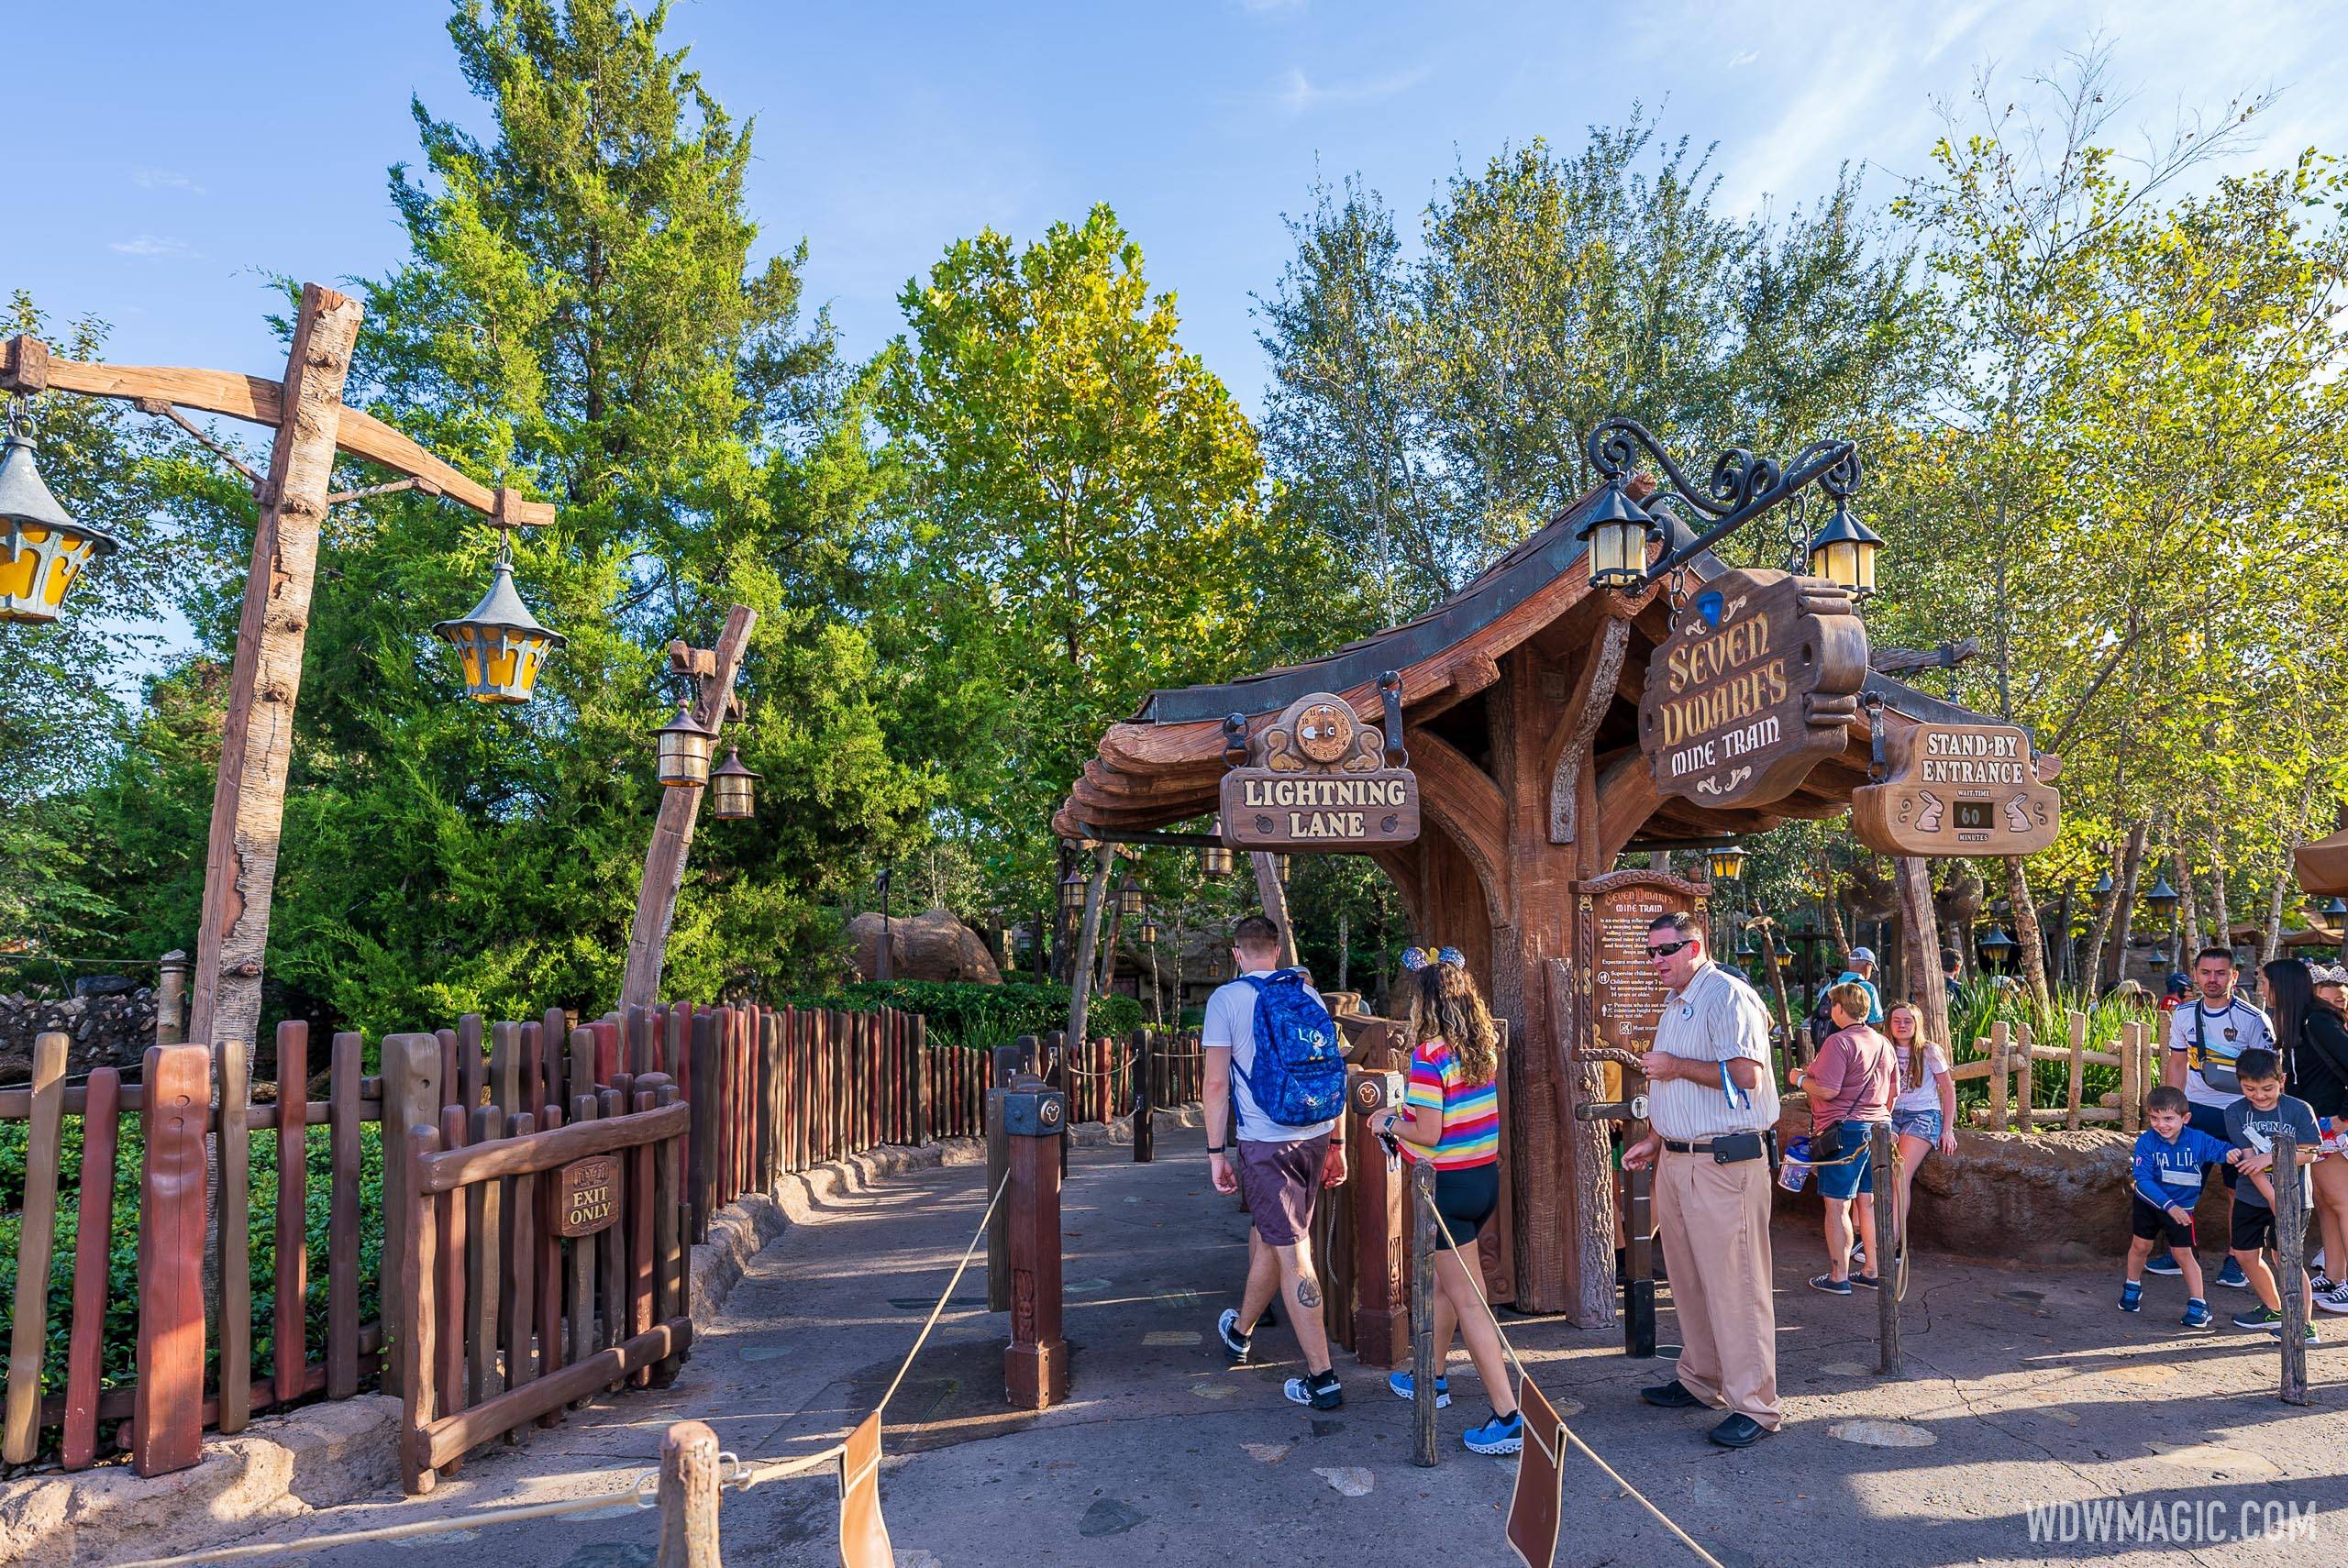 Lightning Lane access at Seven Dwarfs Mine Train hit capacity before day guests could purchase